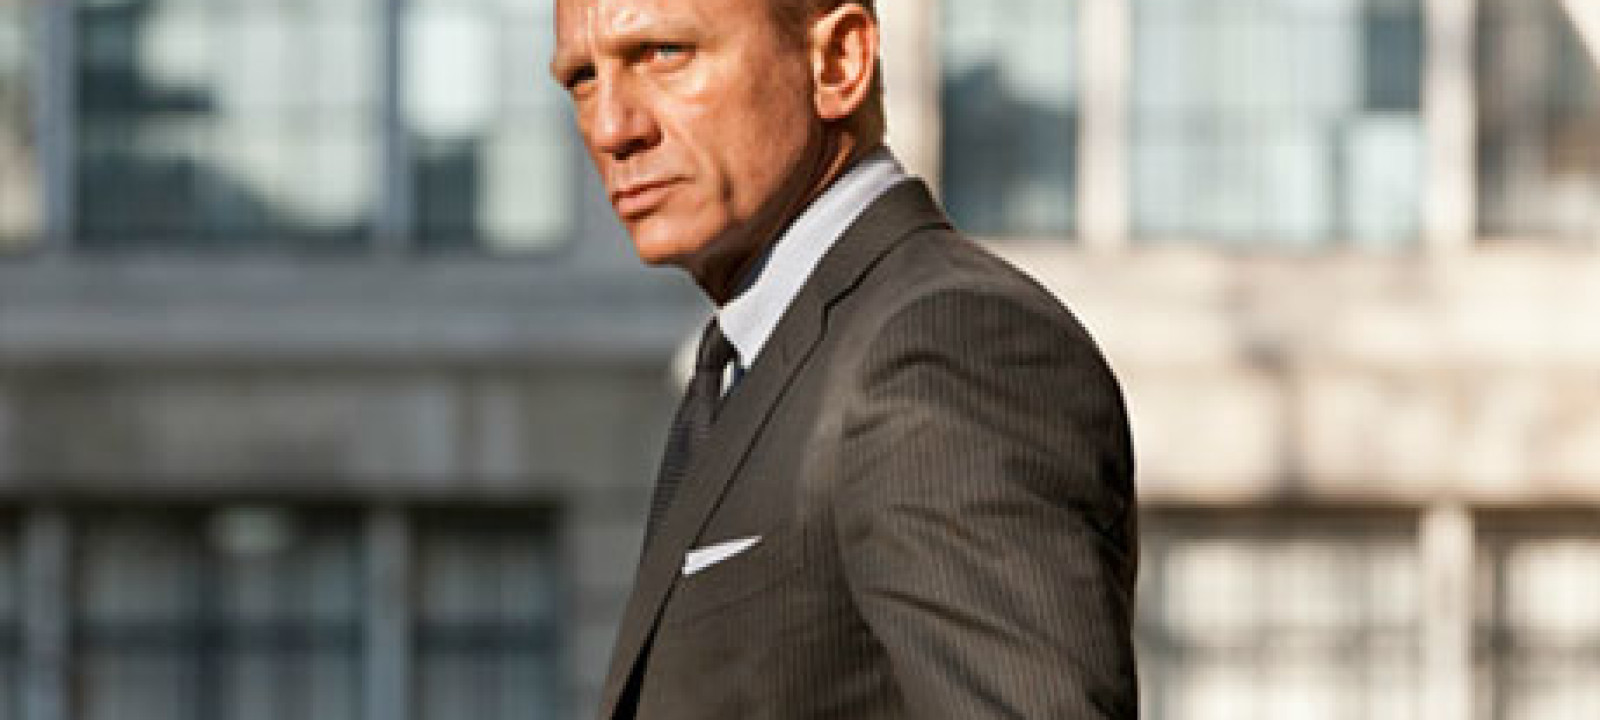 index of skyfall 720p